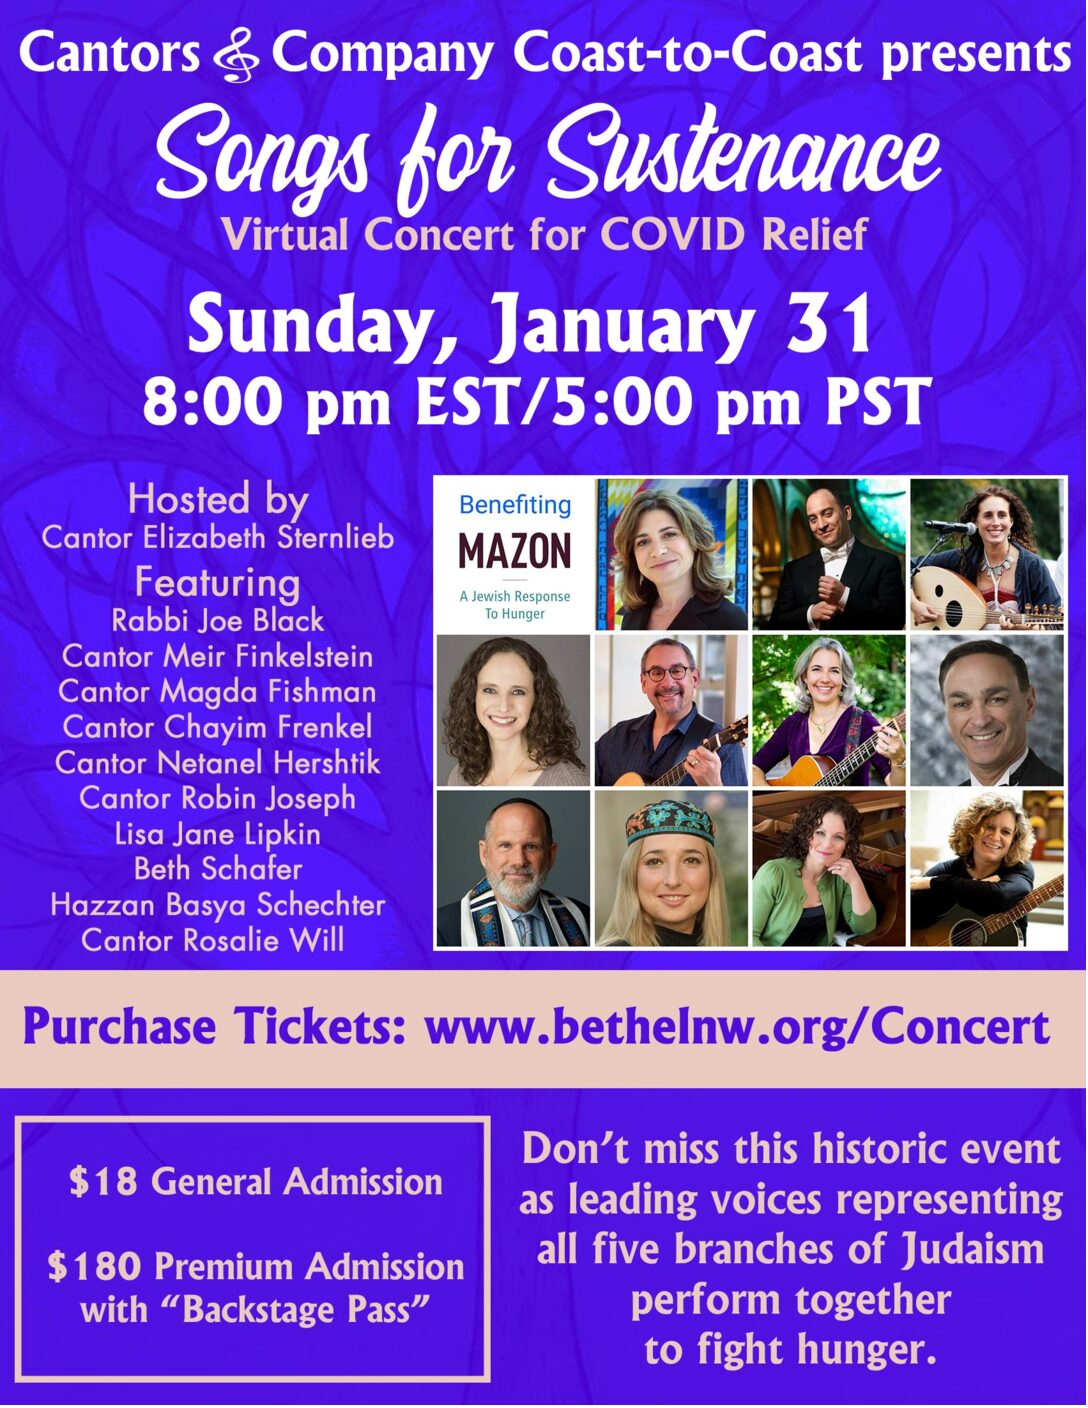 Cantors & Company Coast-to-Coast Presents Songs for Sustenance Virtual Concert